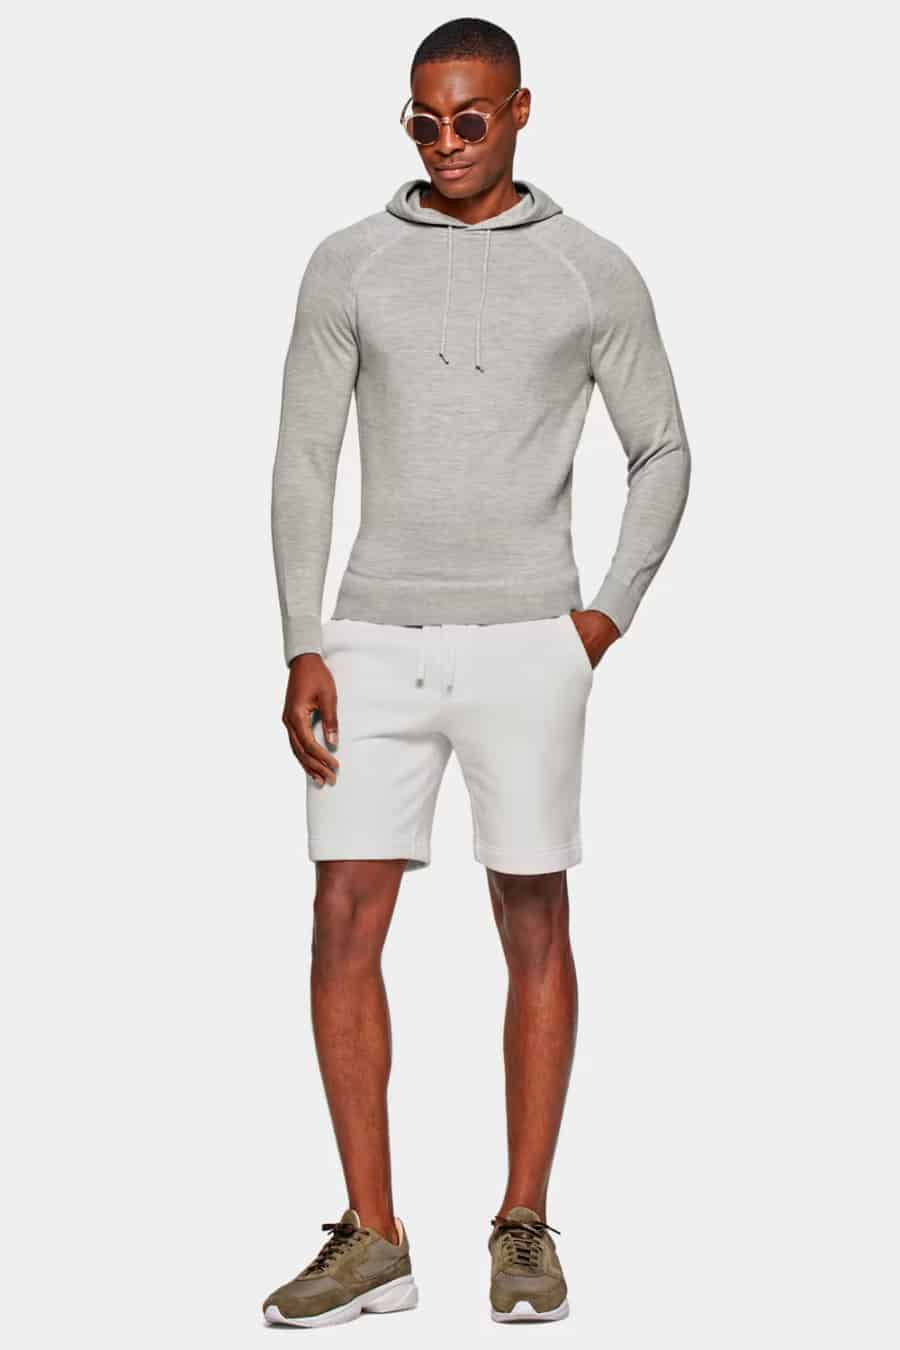 Men's white cotton shorts, grey hoodie and running sneakers outfit